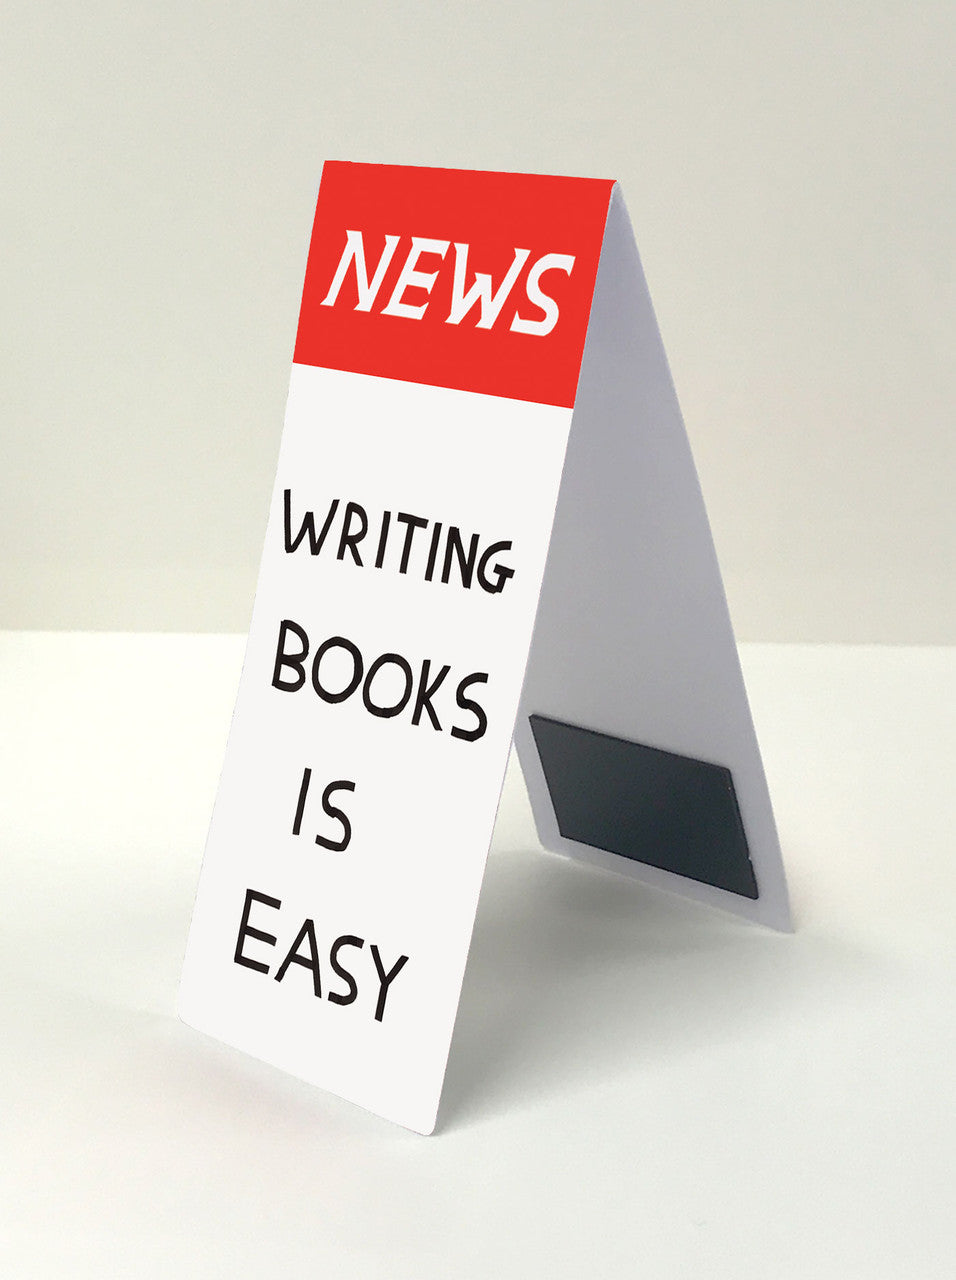 NEWS - Writing Books Is Easy